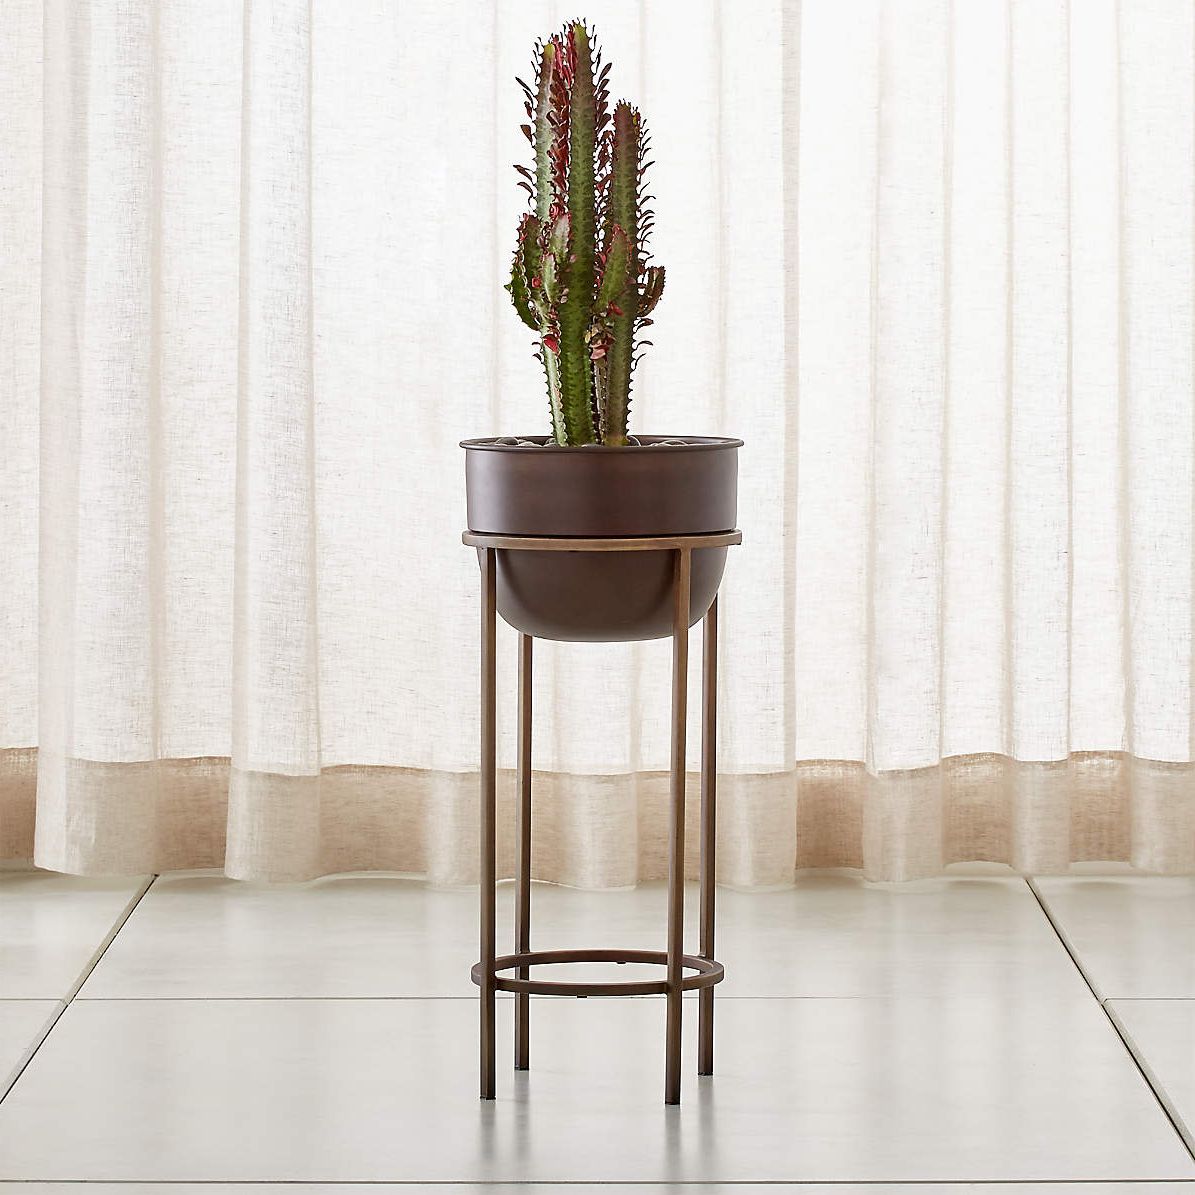 Crate & Barrel In Most Recently Released Medium Plant Stands (View 4 of 10)